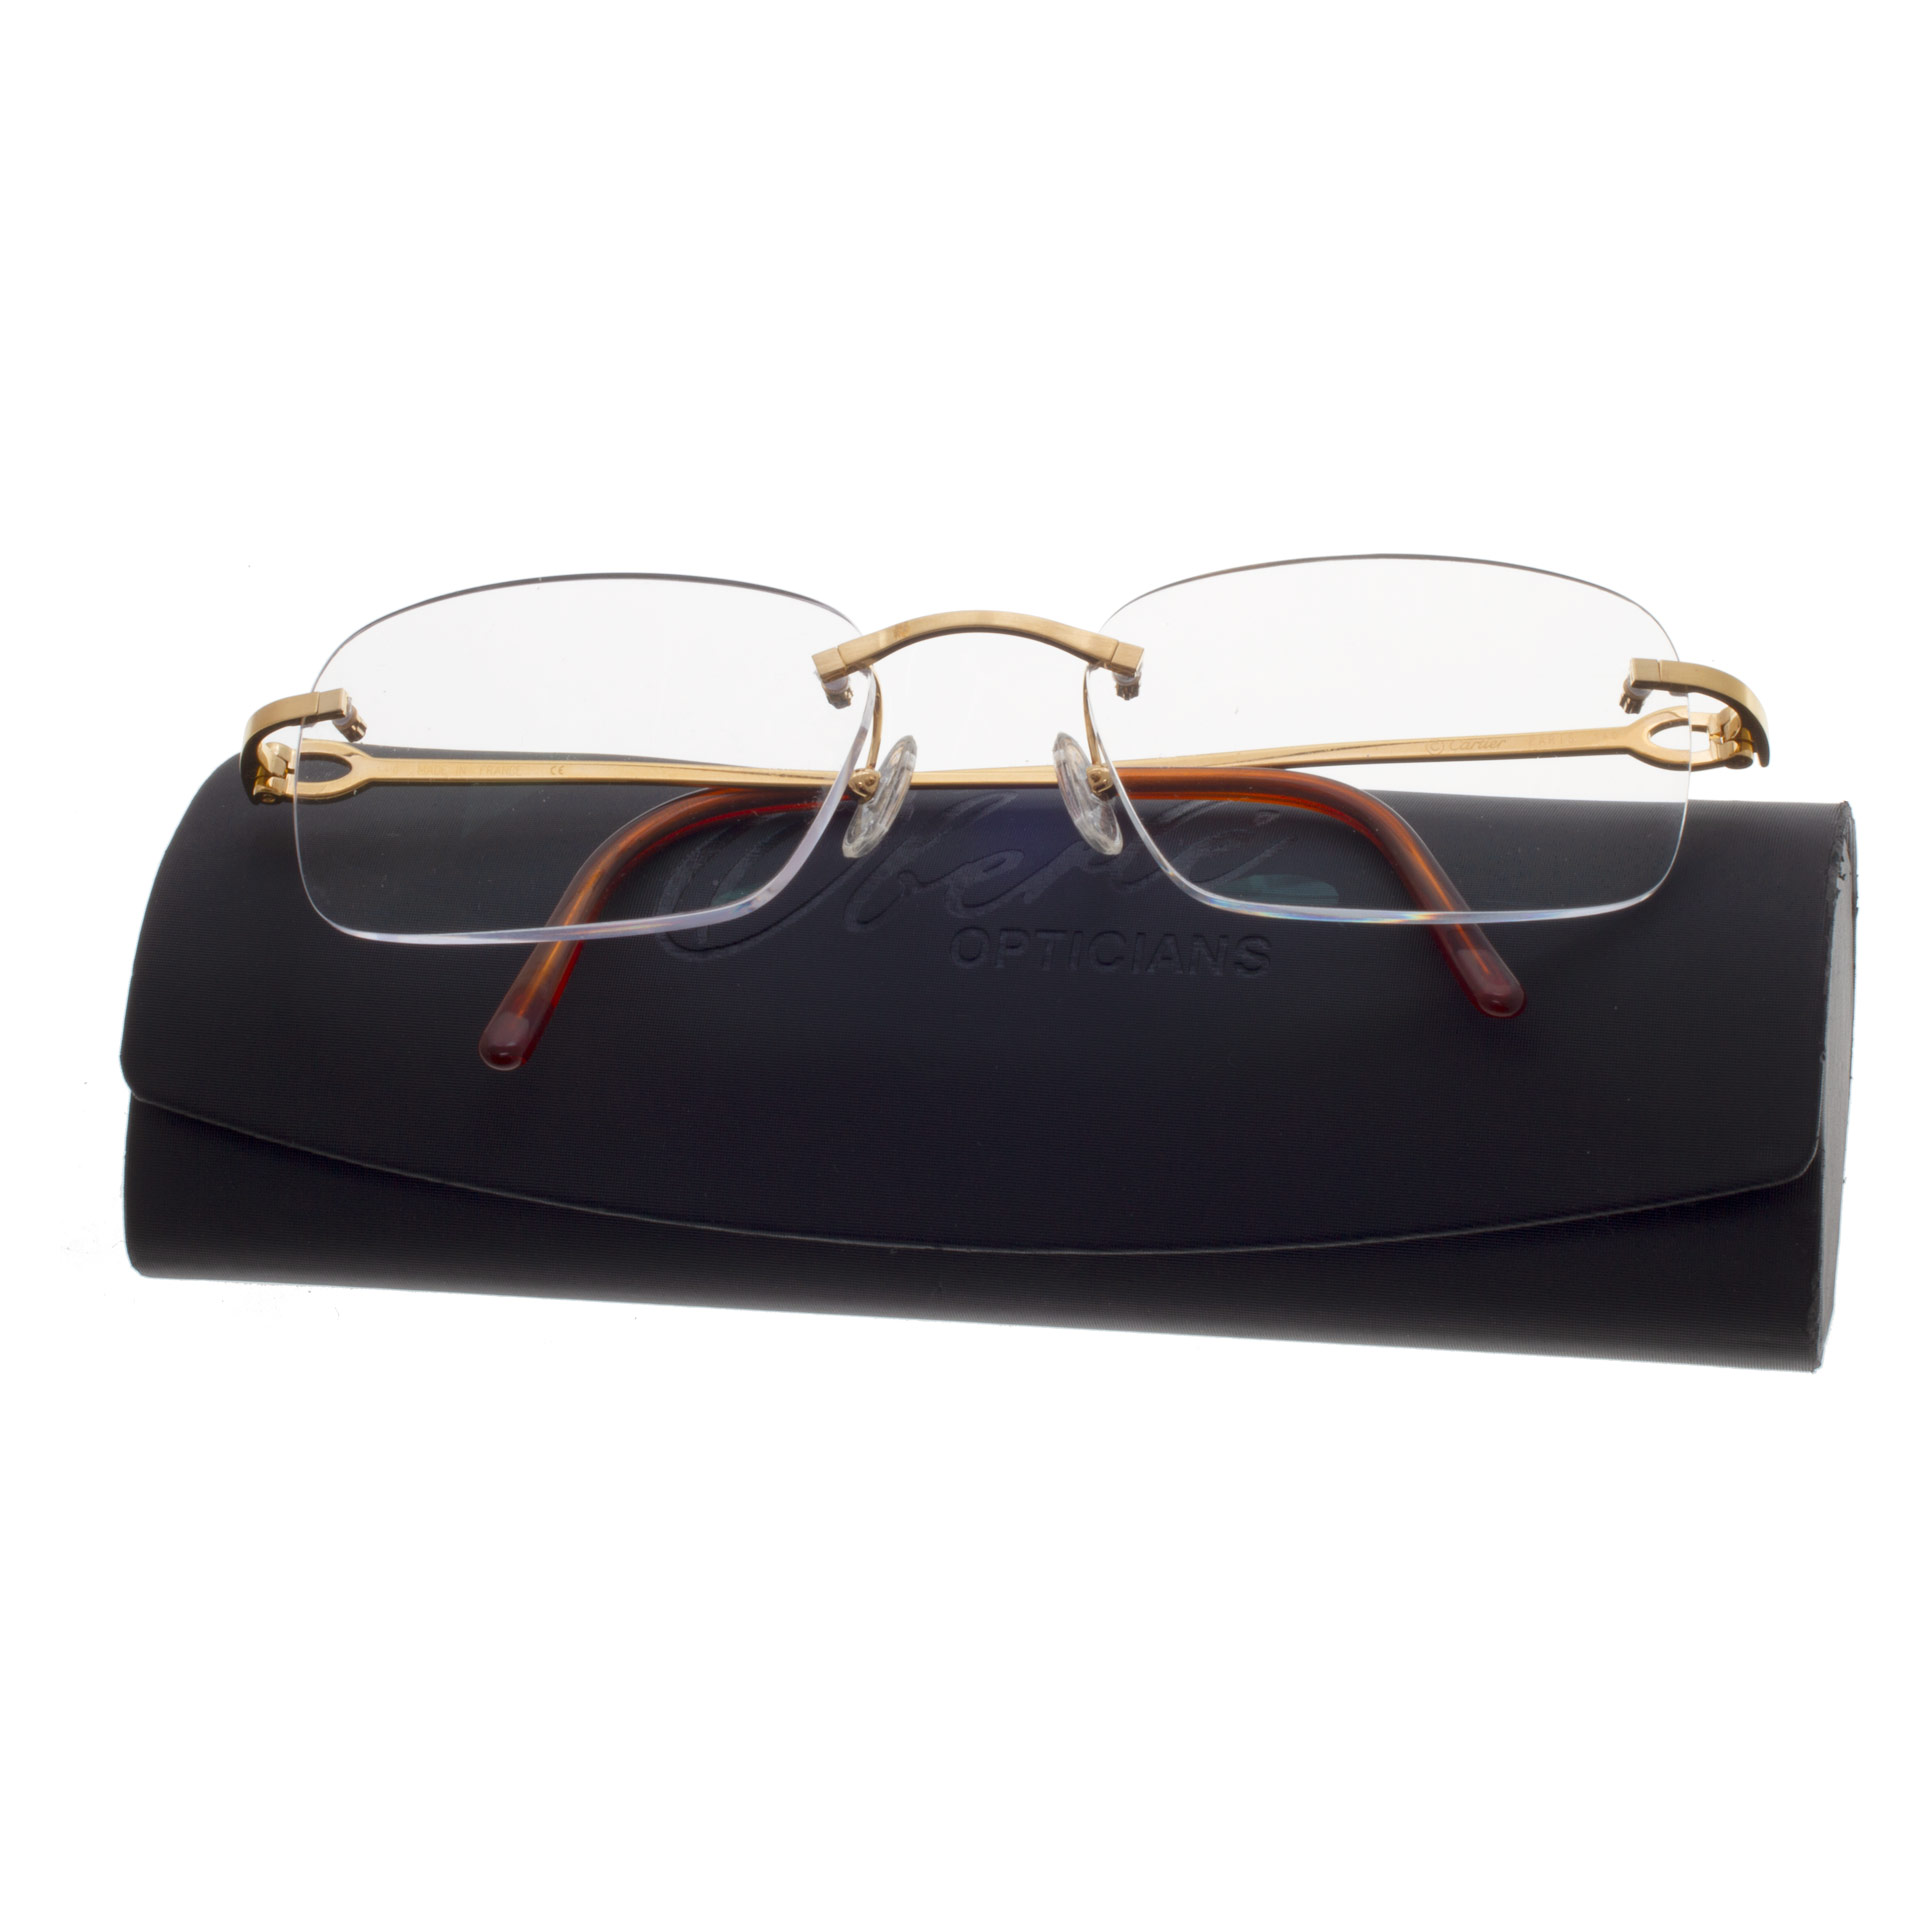 Cartier glasses in 18k gold plated frame. image 5